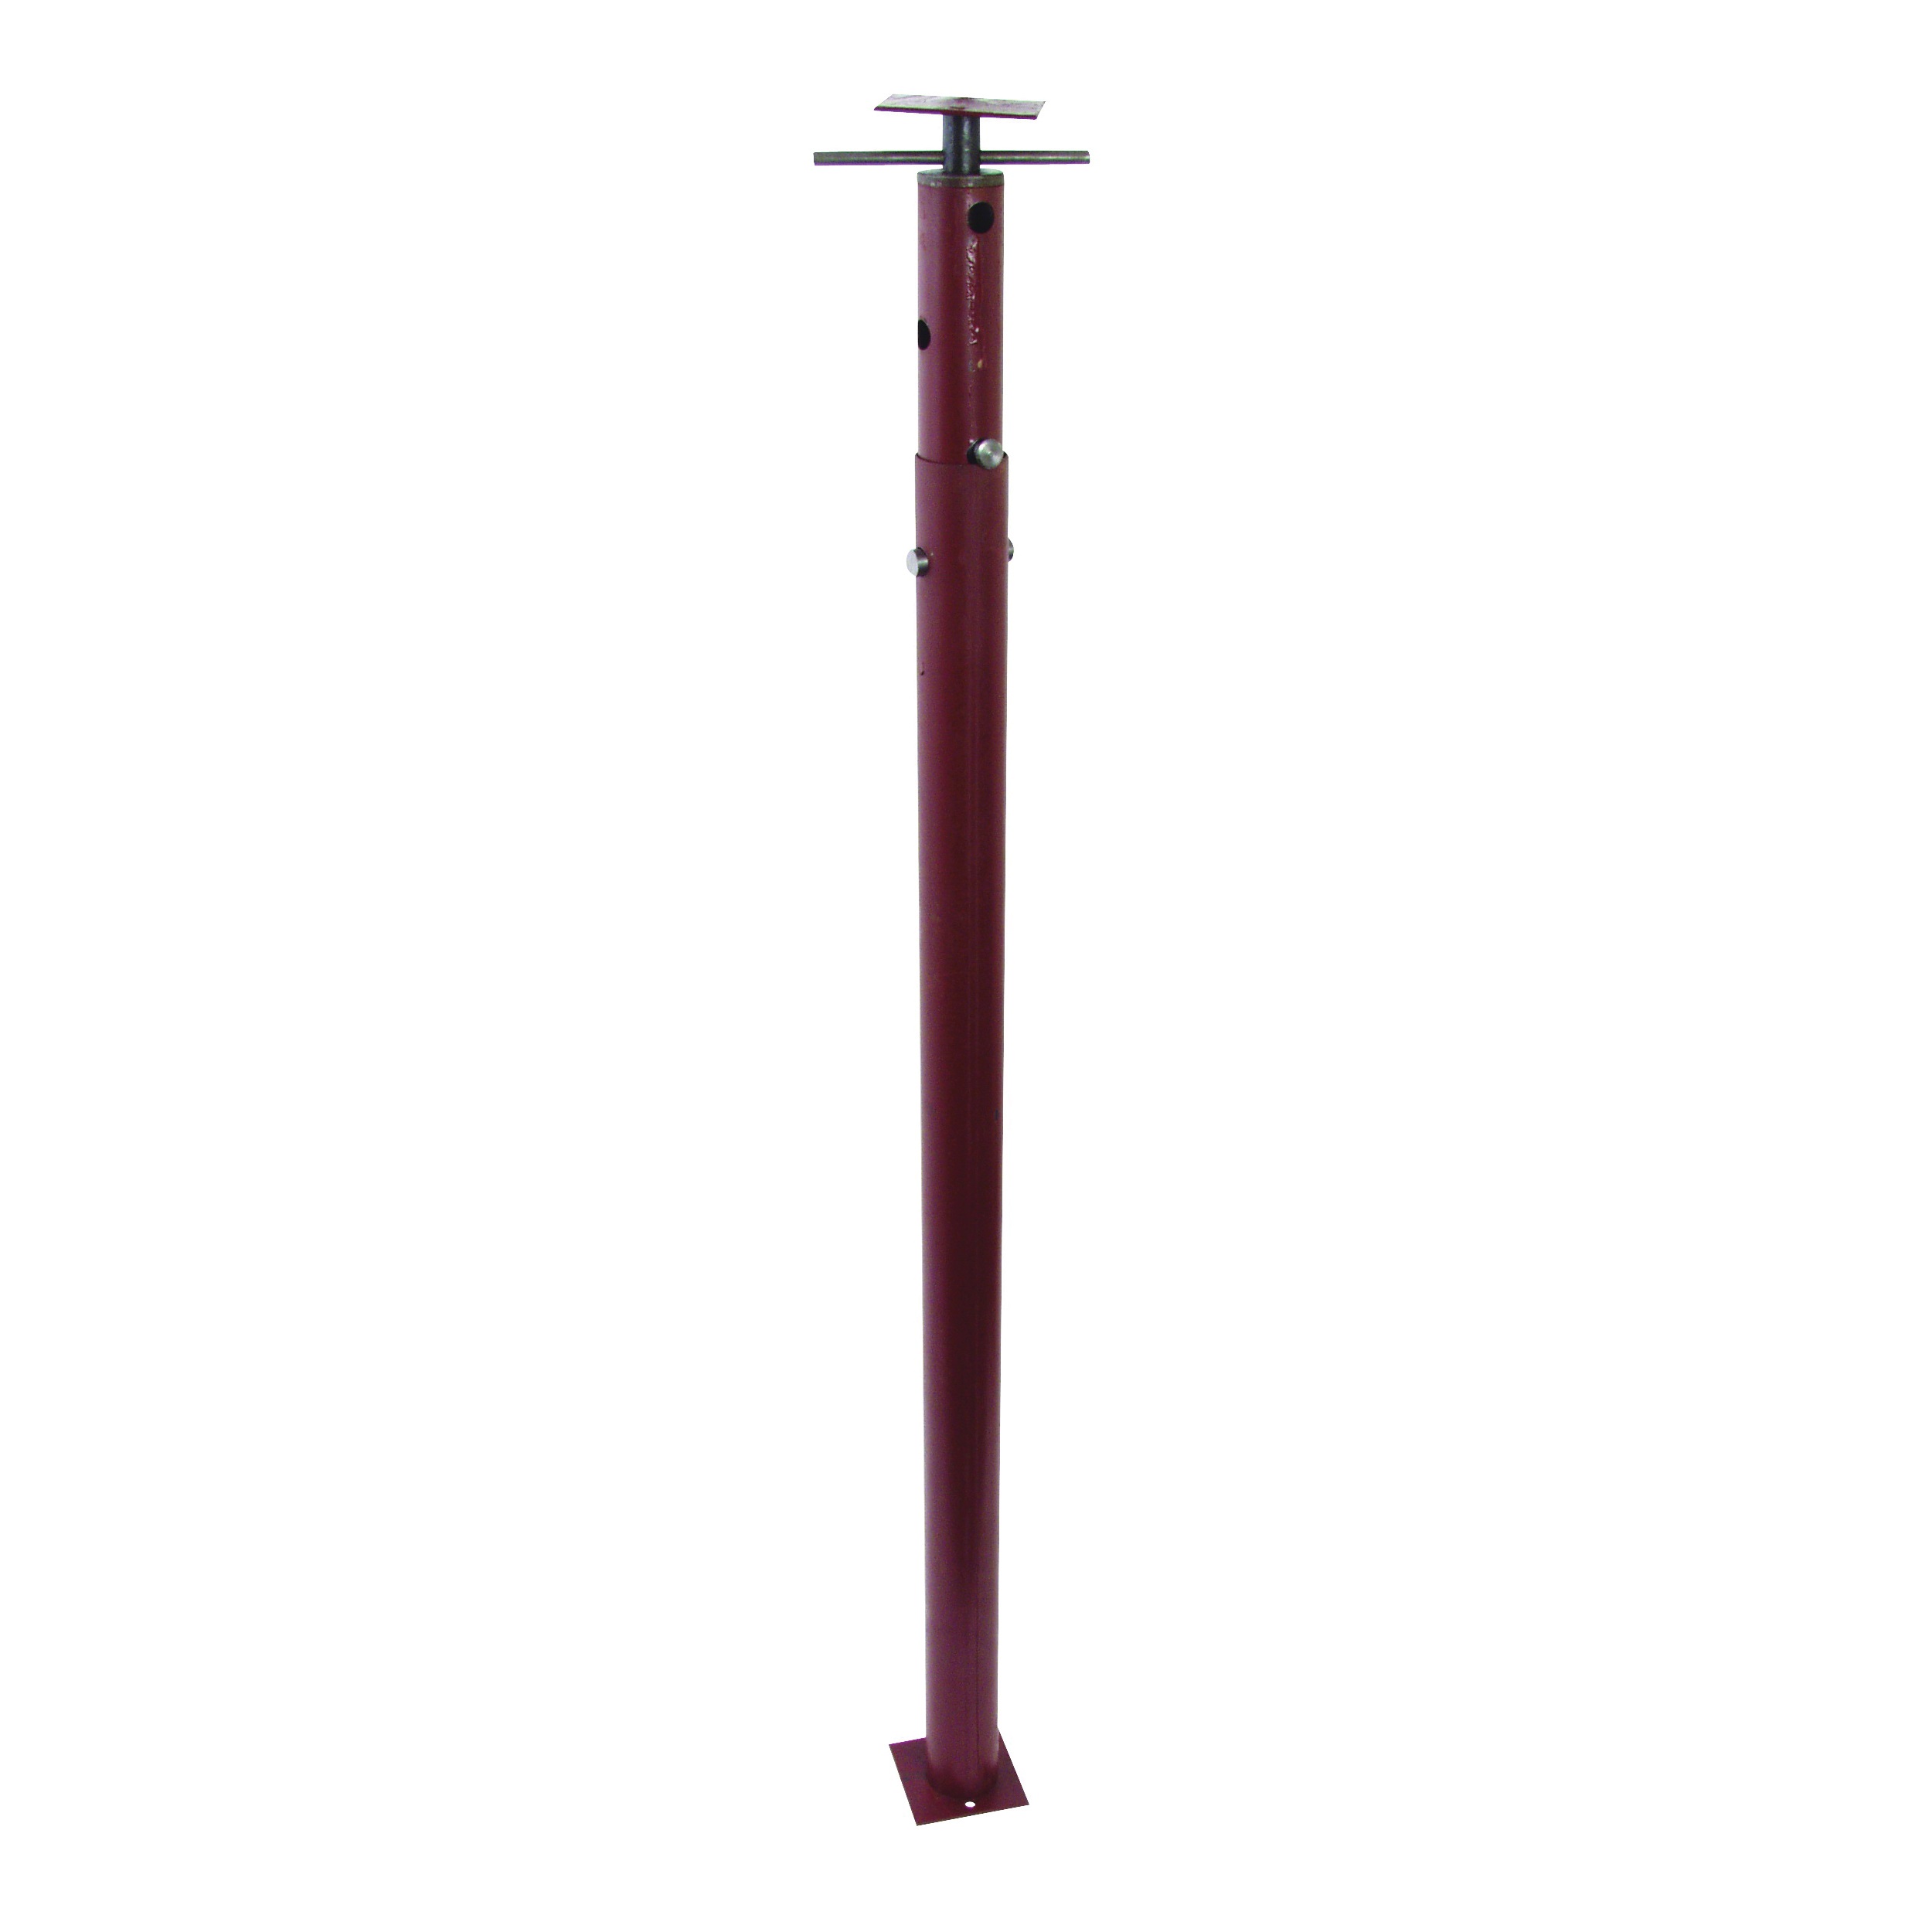 Extend-O-Post Series JP84 Jack Post, 4 ft 8 in to 8 ft 4 in